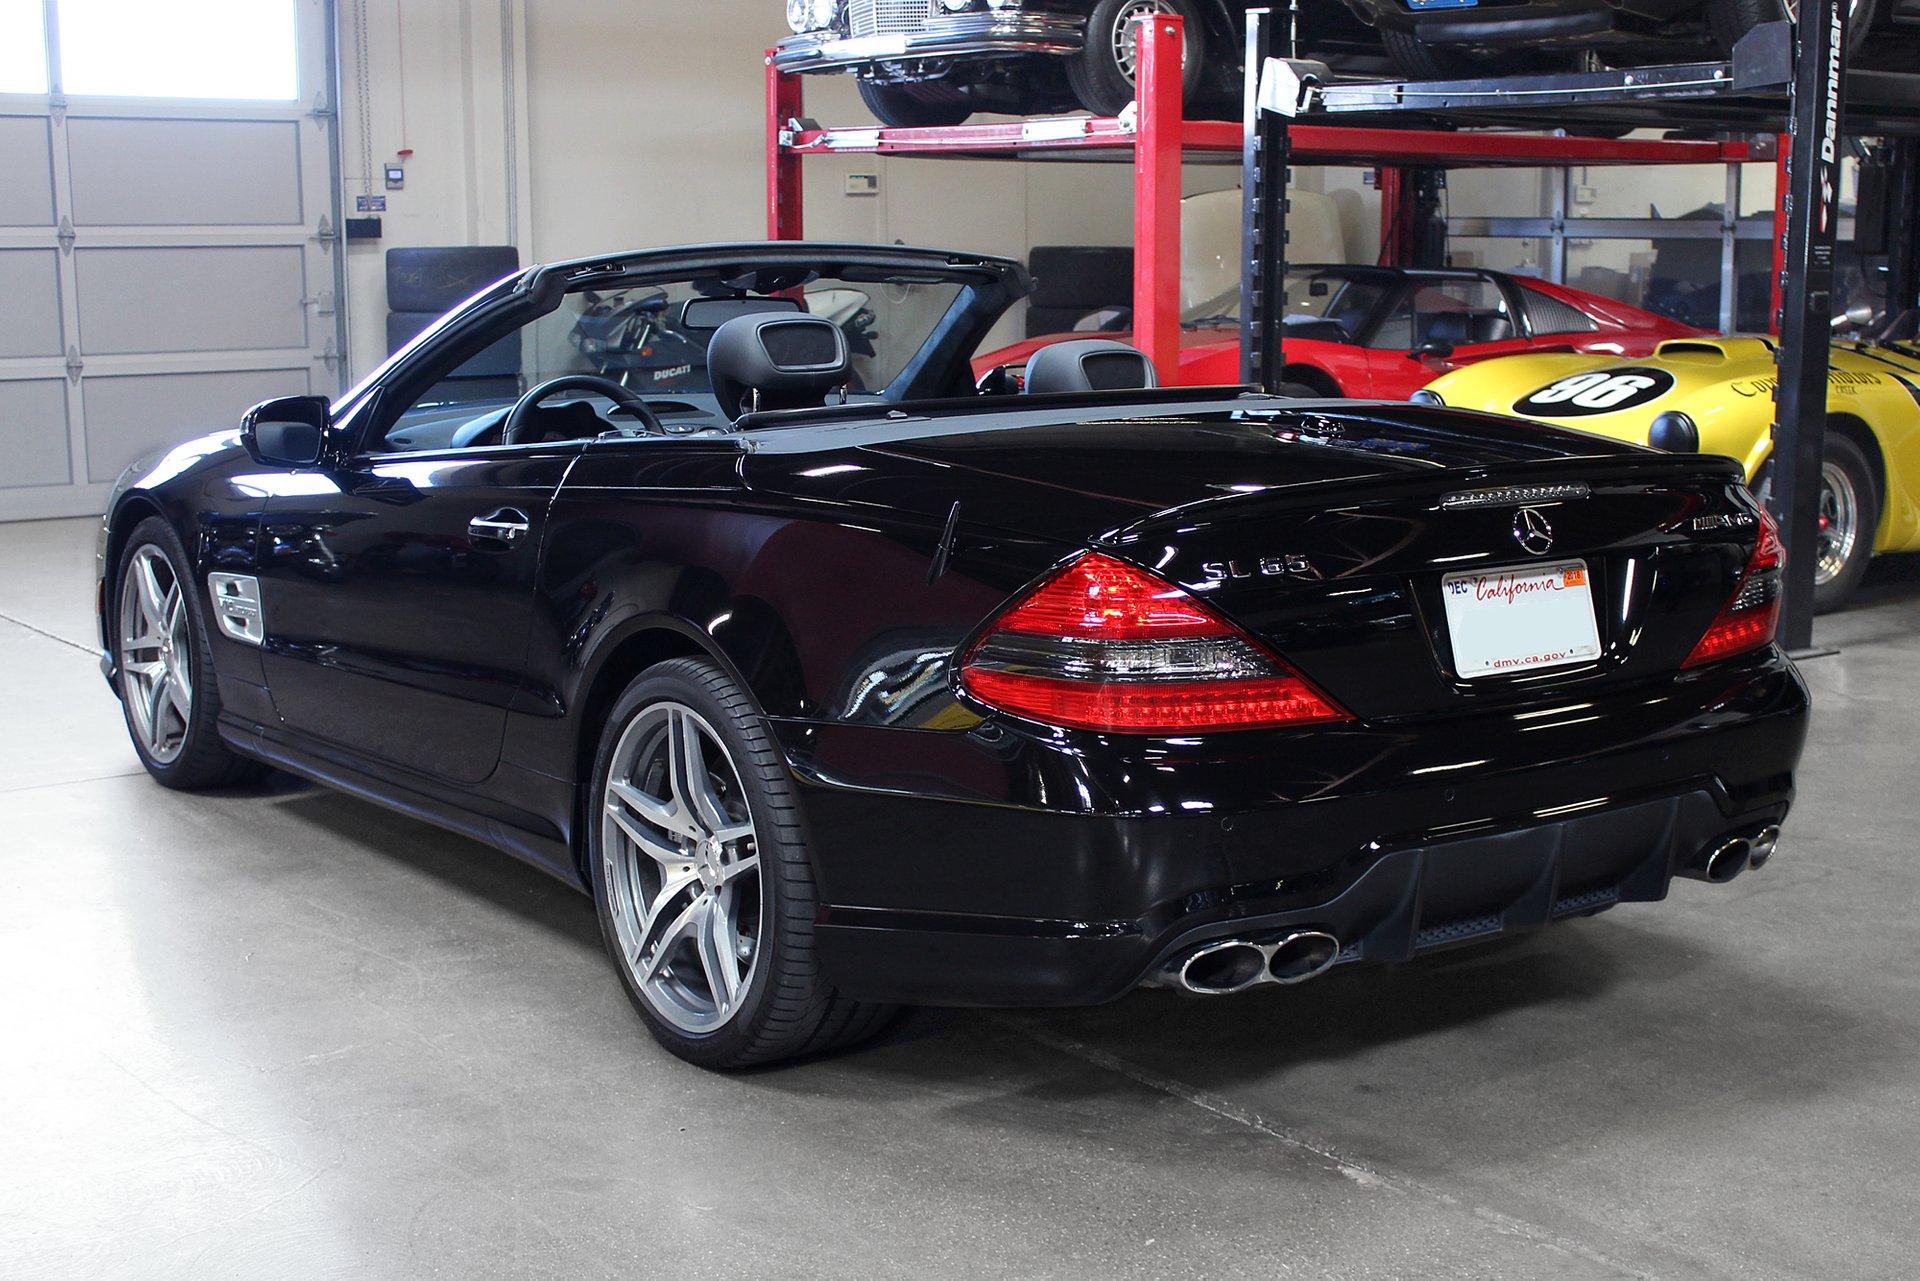 USED MERCEDES-BENZ SL65 AMG 2009 for sale in Los Angeles, CA